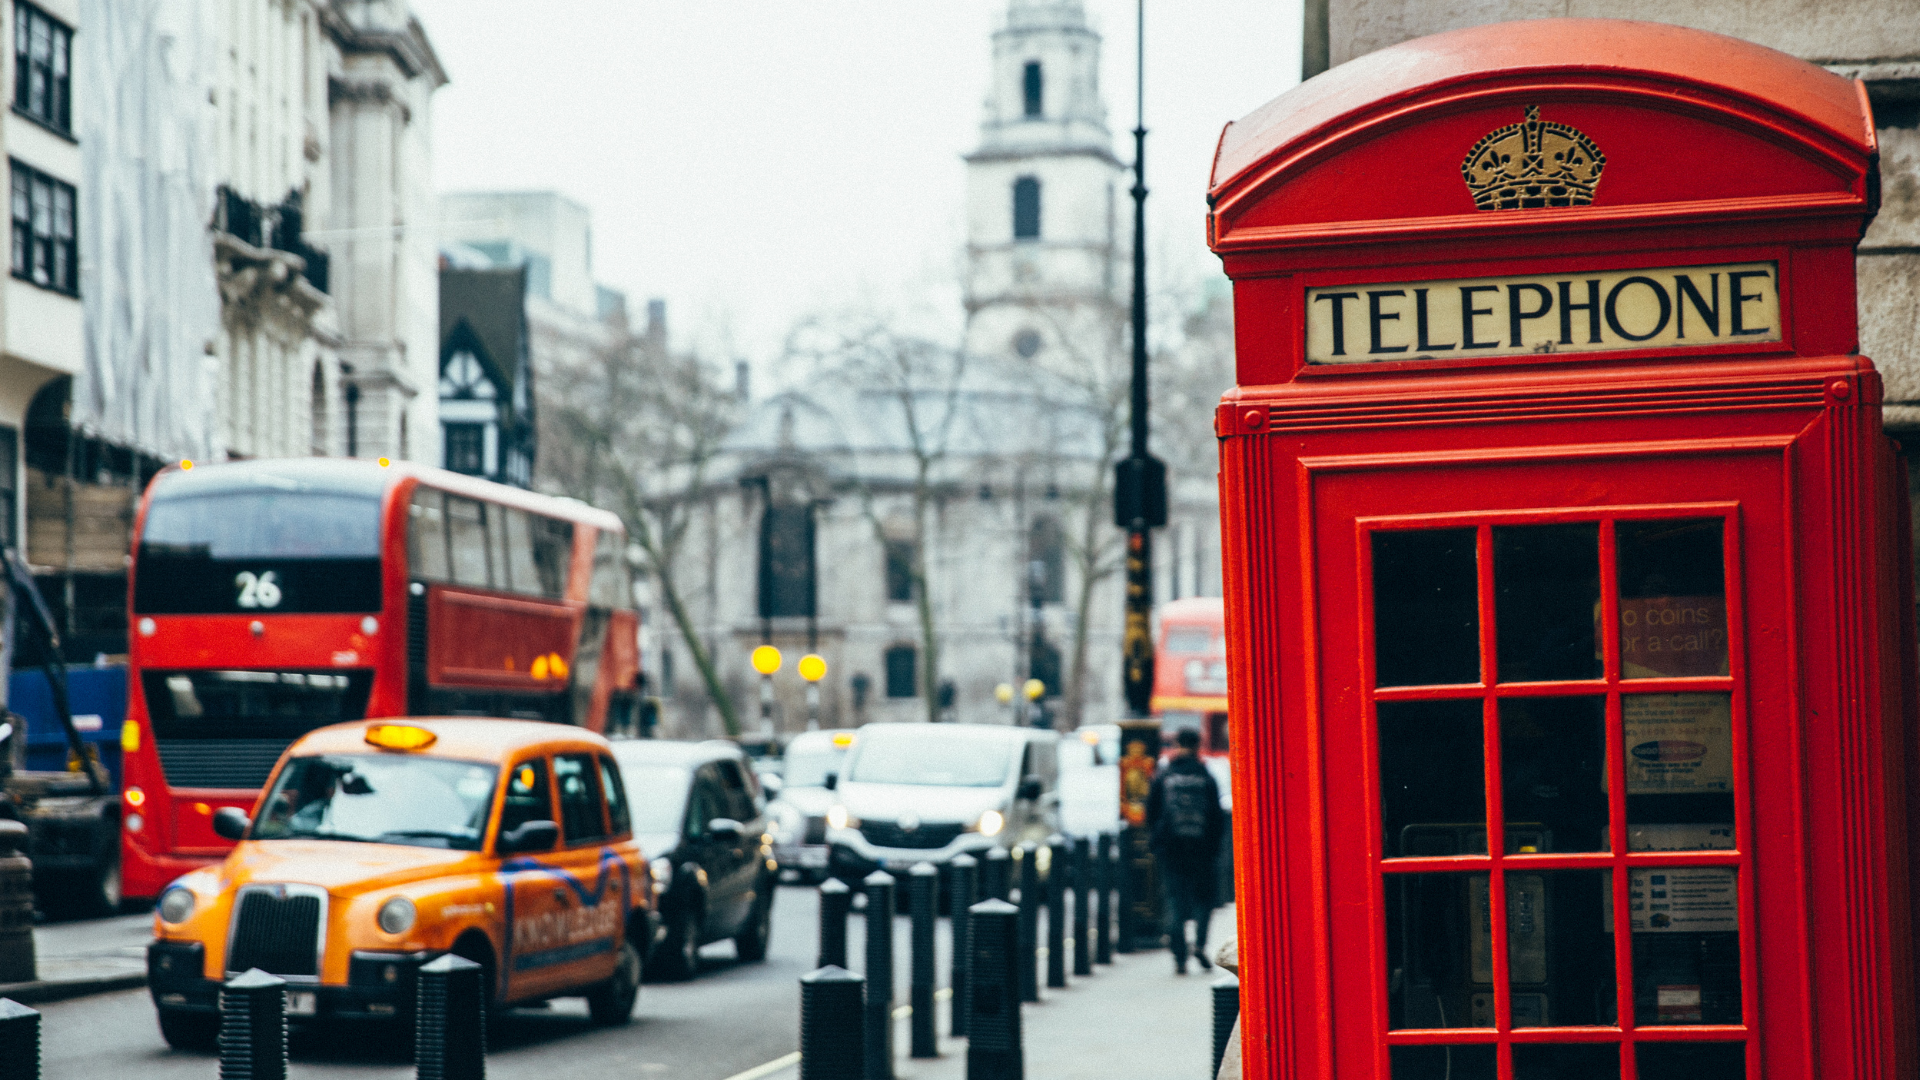 Photo of London street with phone booth